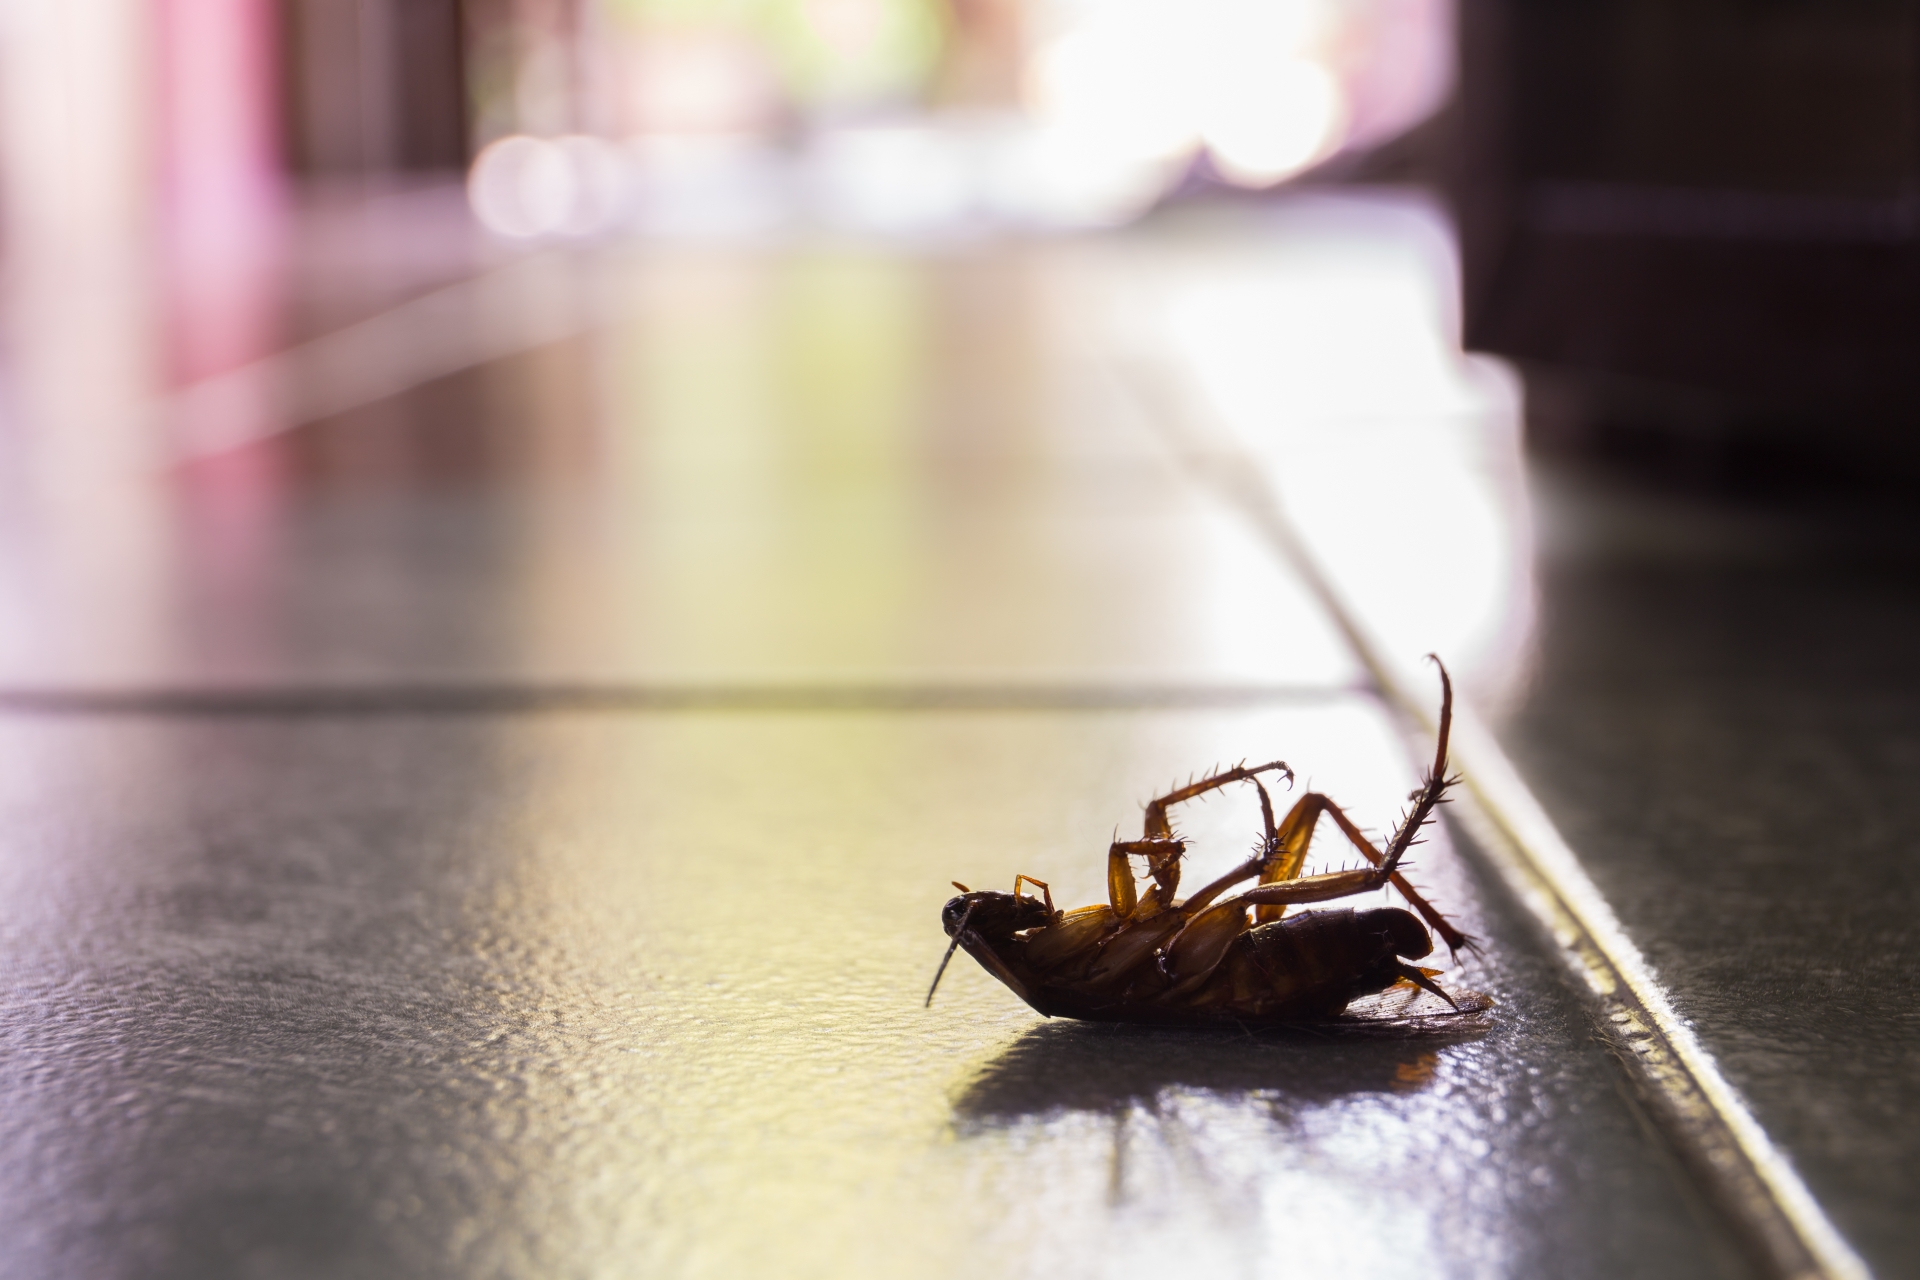 Cockroach Control, Pest Control in Egham, Englefield Green, TW20. Call Now 020 8166 9746